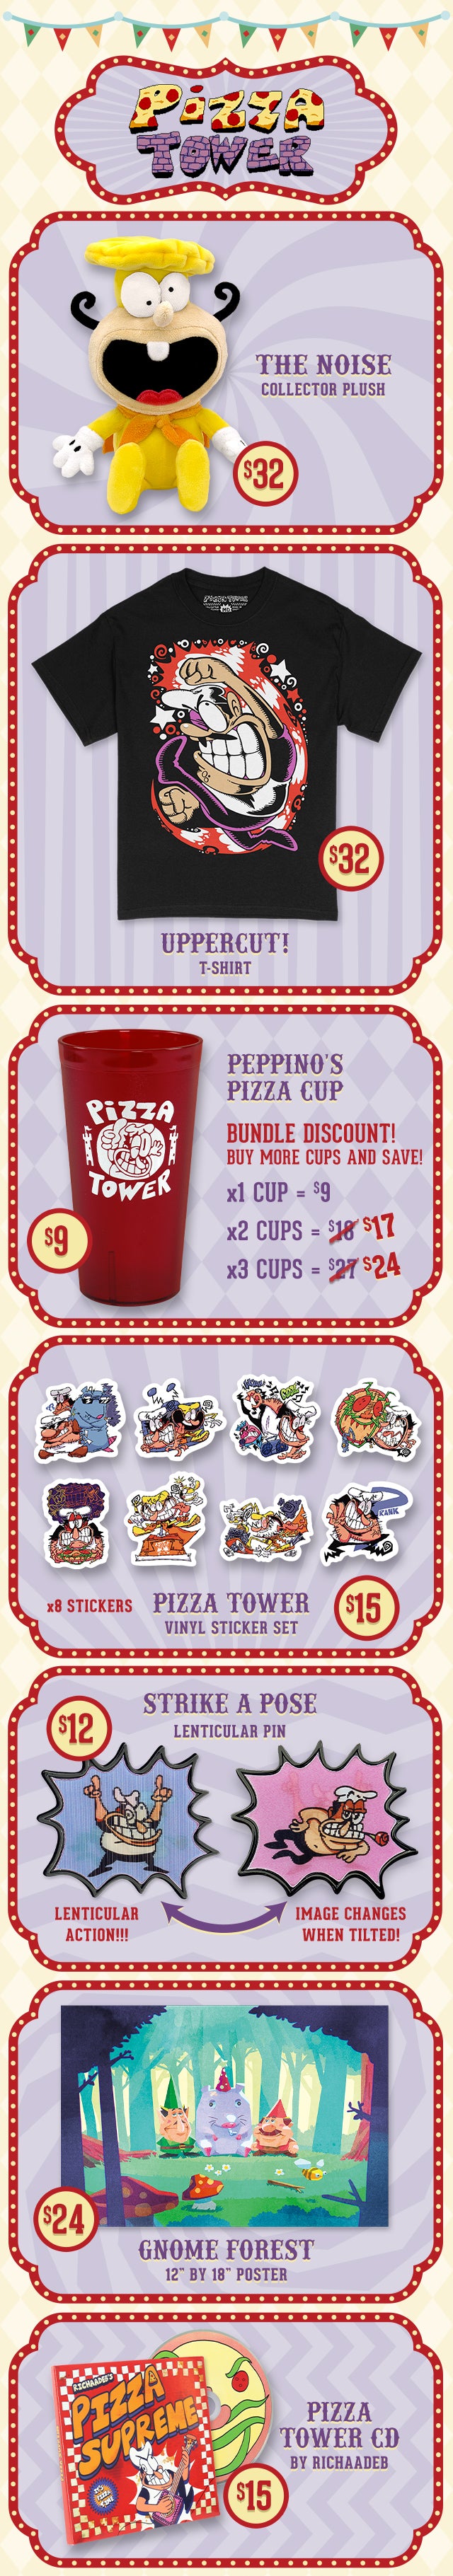 New Pizza Tower merch available at Fangamer.com